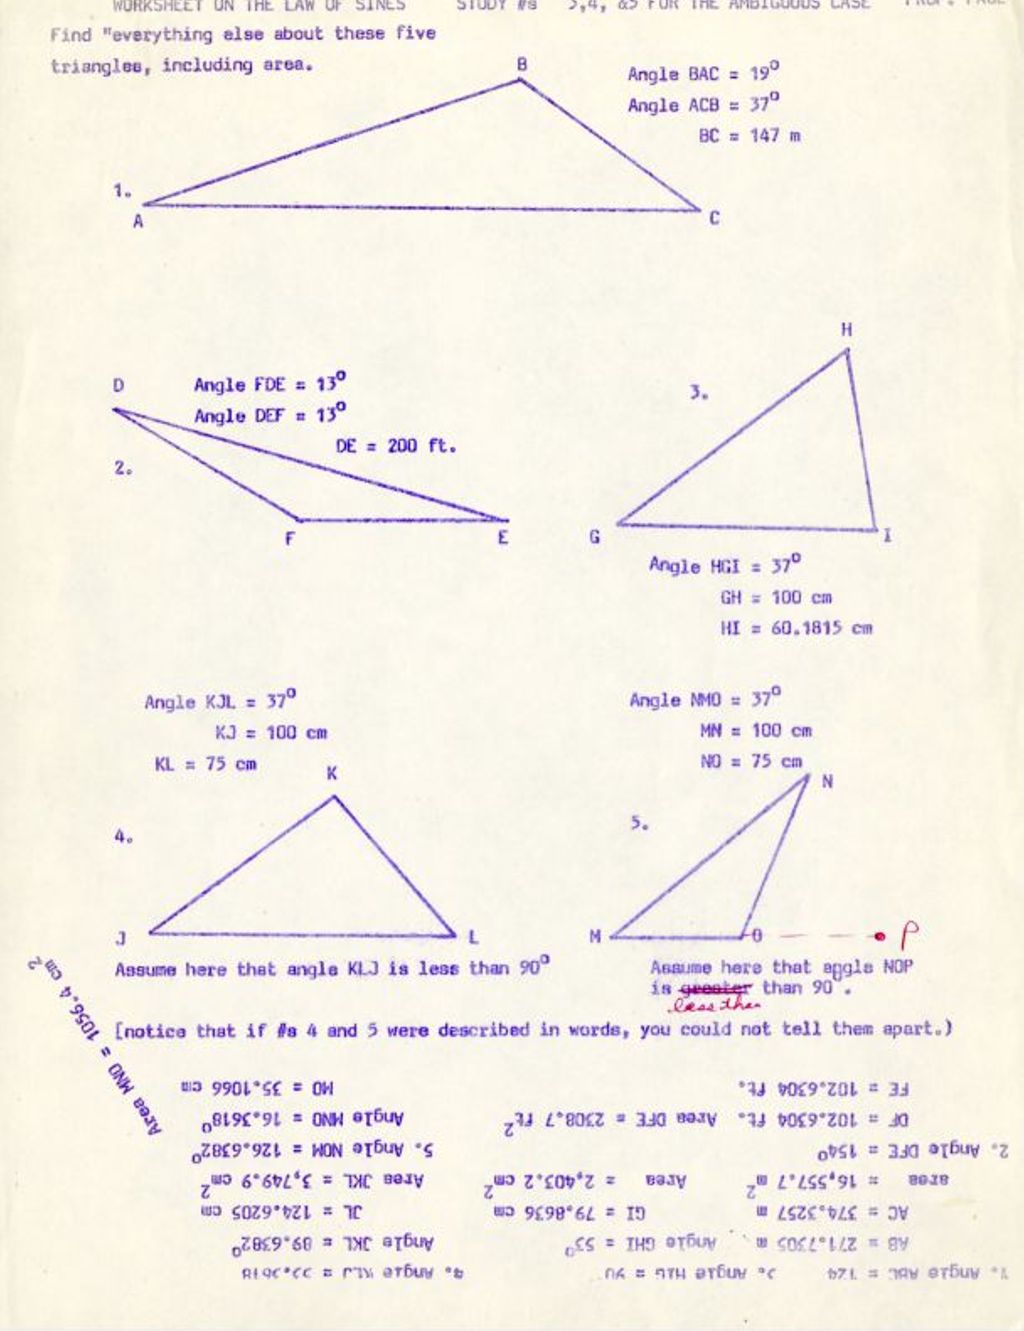 Miniature of Worksheet on the Law of Sines Study # 3, 4, &5 for the Ambiguous Case w/ answers